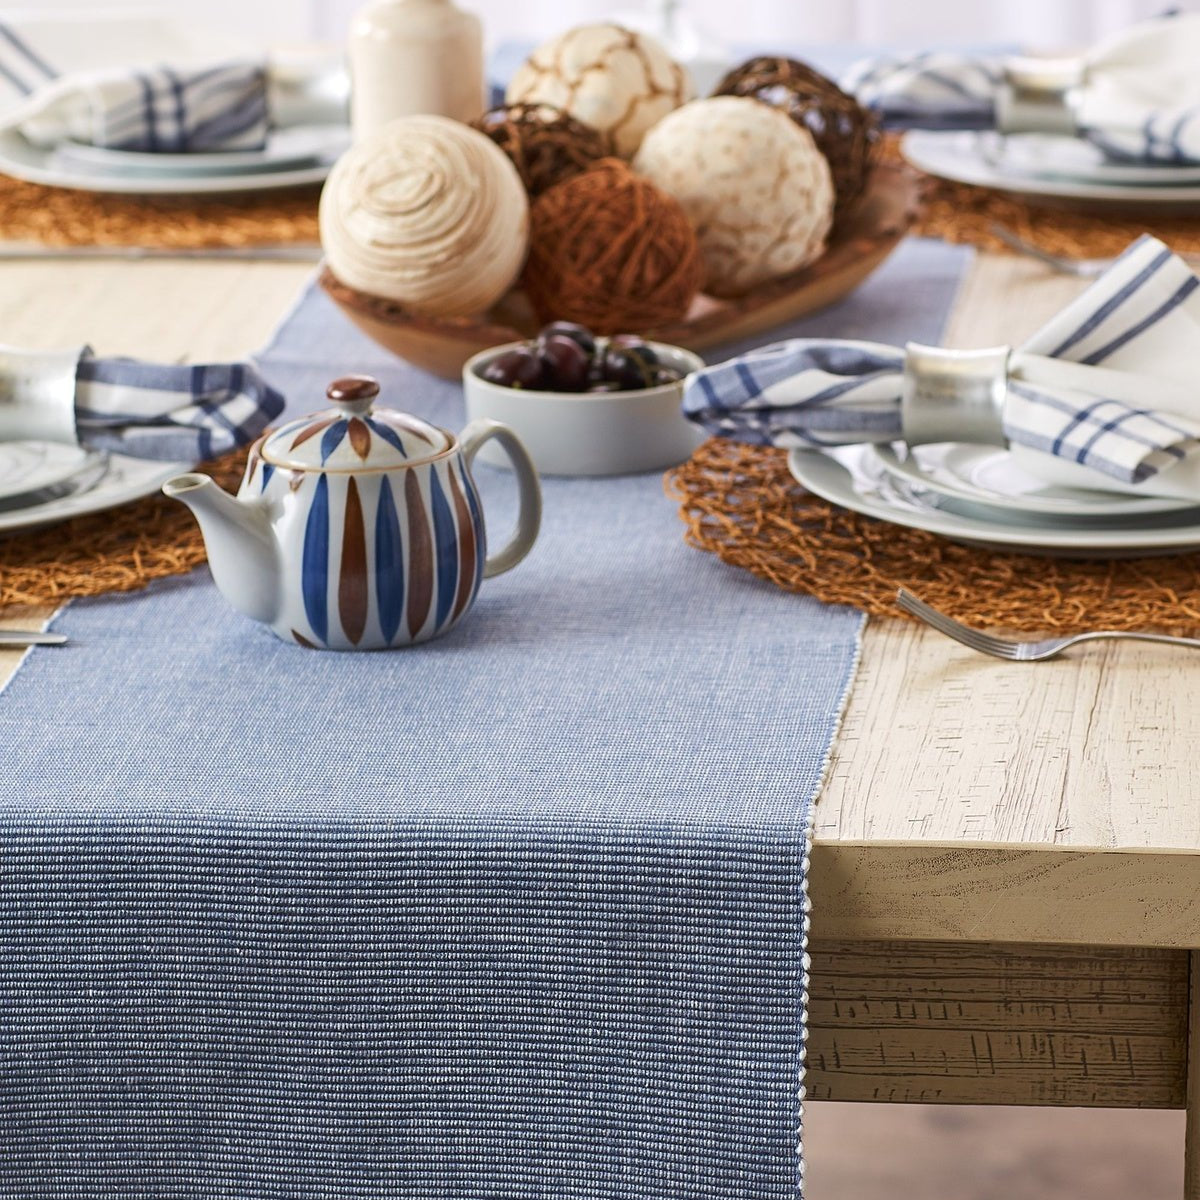 Stonewash Blue & White 2-Tone Ribbed Table Runner 13x72 - Table Runners